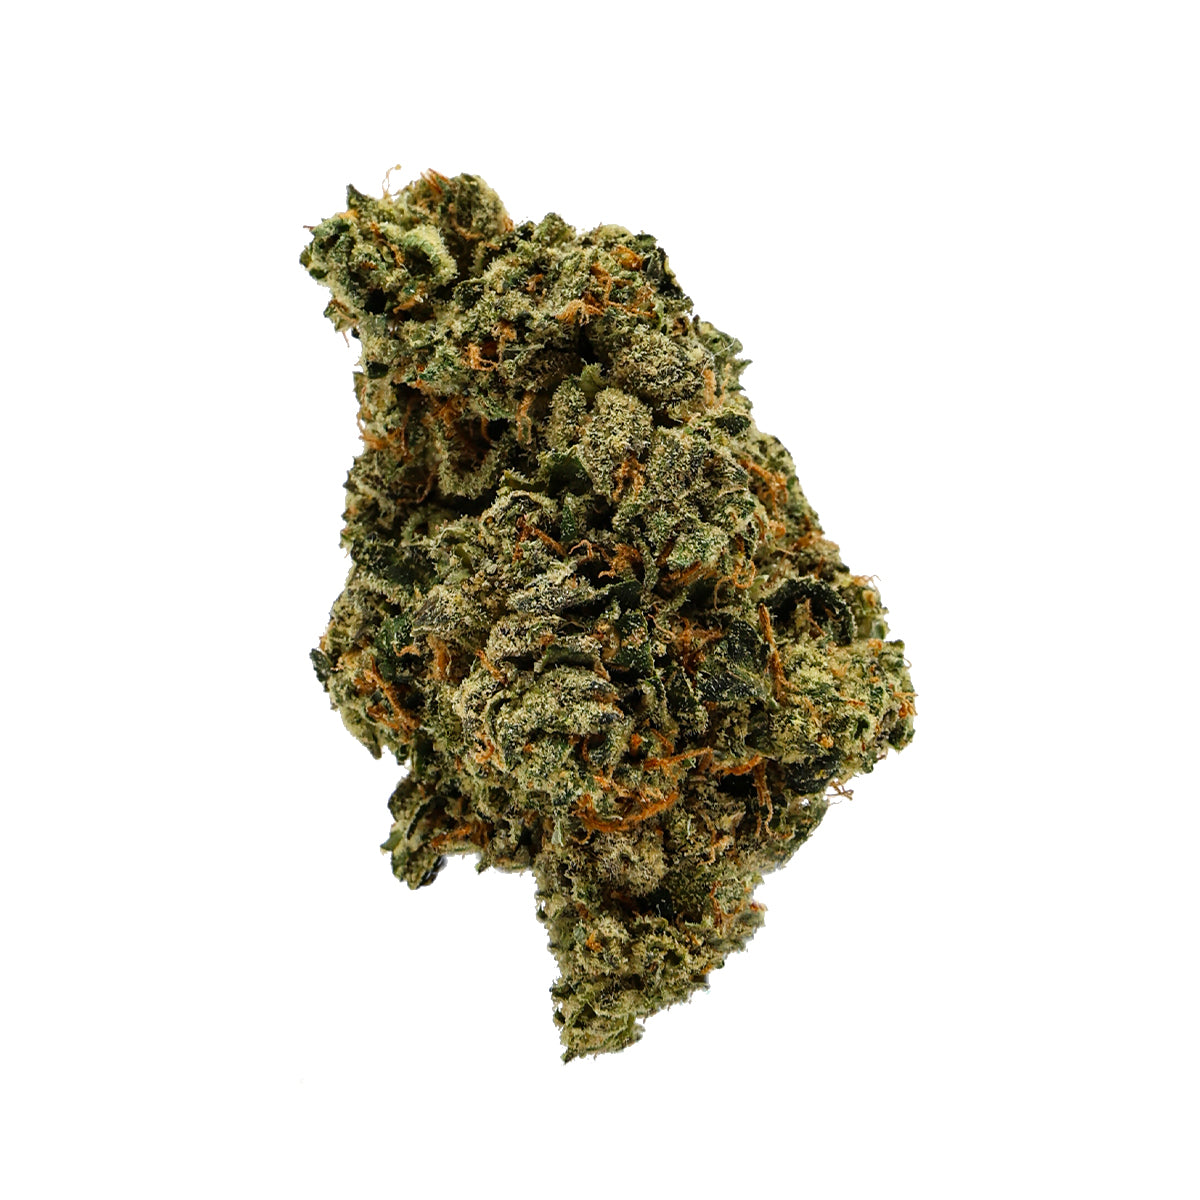 Lantz THCa Indica Premium Hemp Flower - This indica dominant hybrid is a earthy fruity variety with light green trichome covered nugs. Definitely a crowd favorite with dominant terpenes such as Limonene, Caryophyllene & Linalool. Available in 3.5g and 14g size jars.